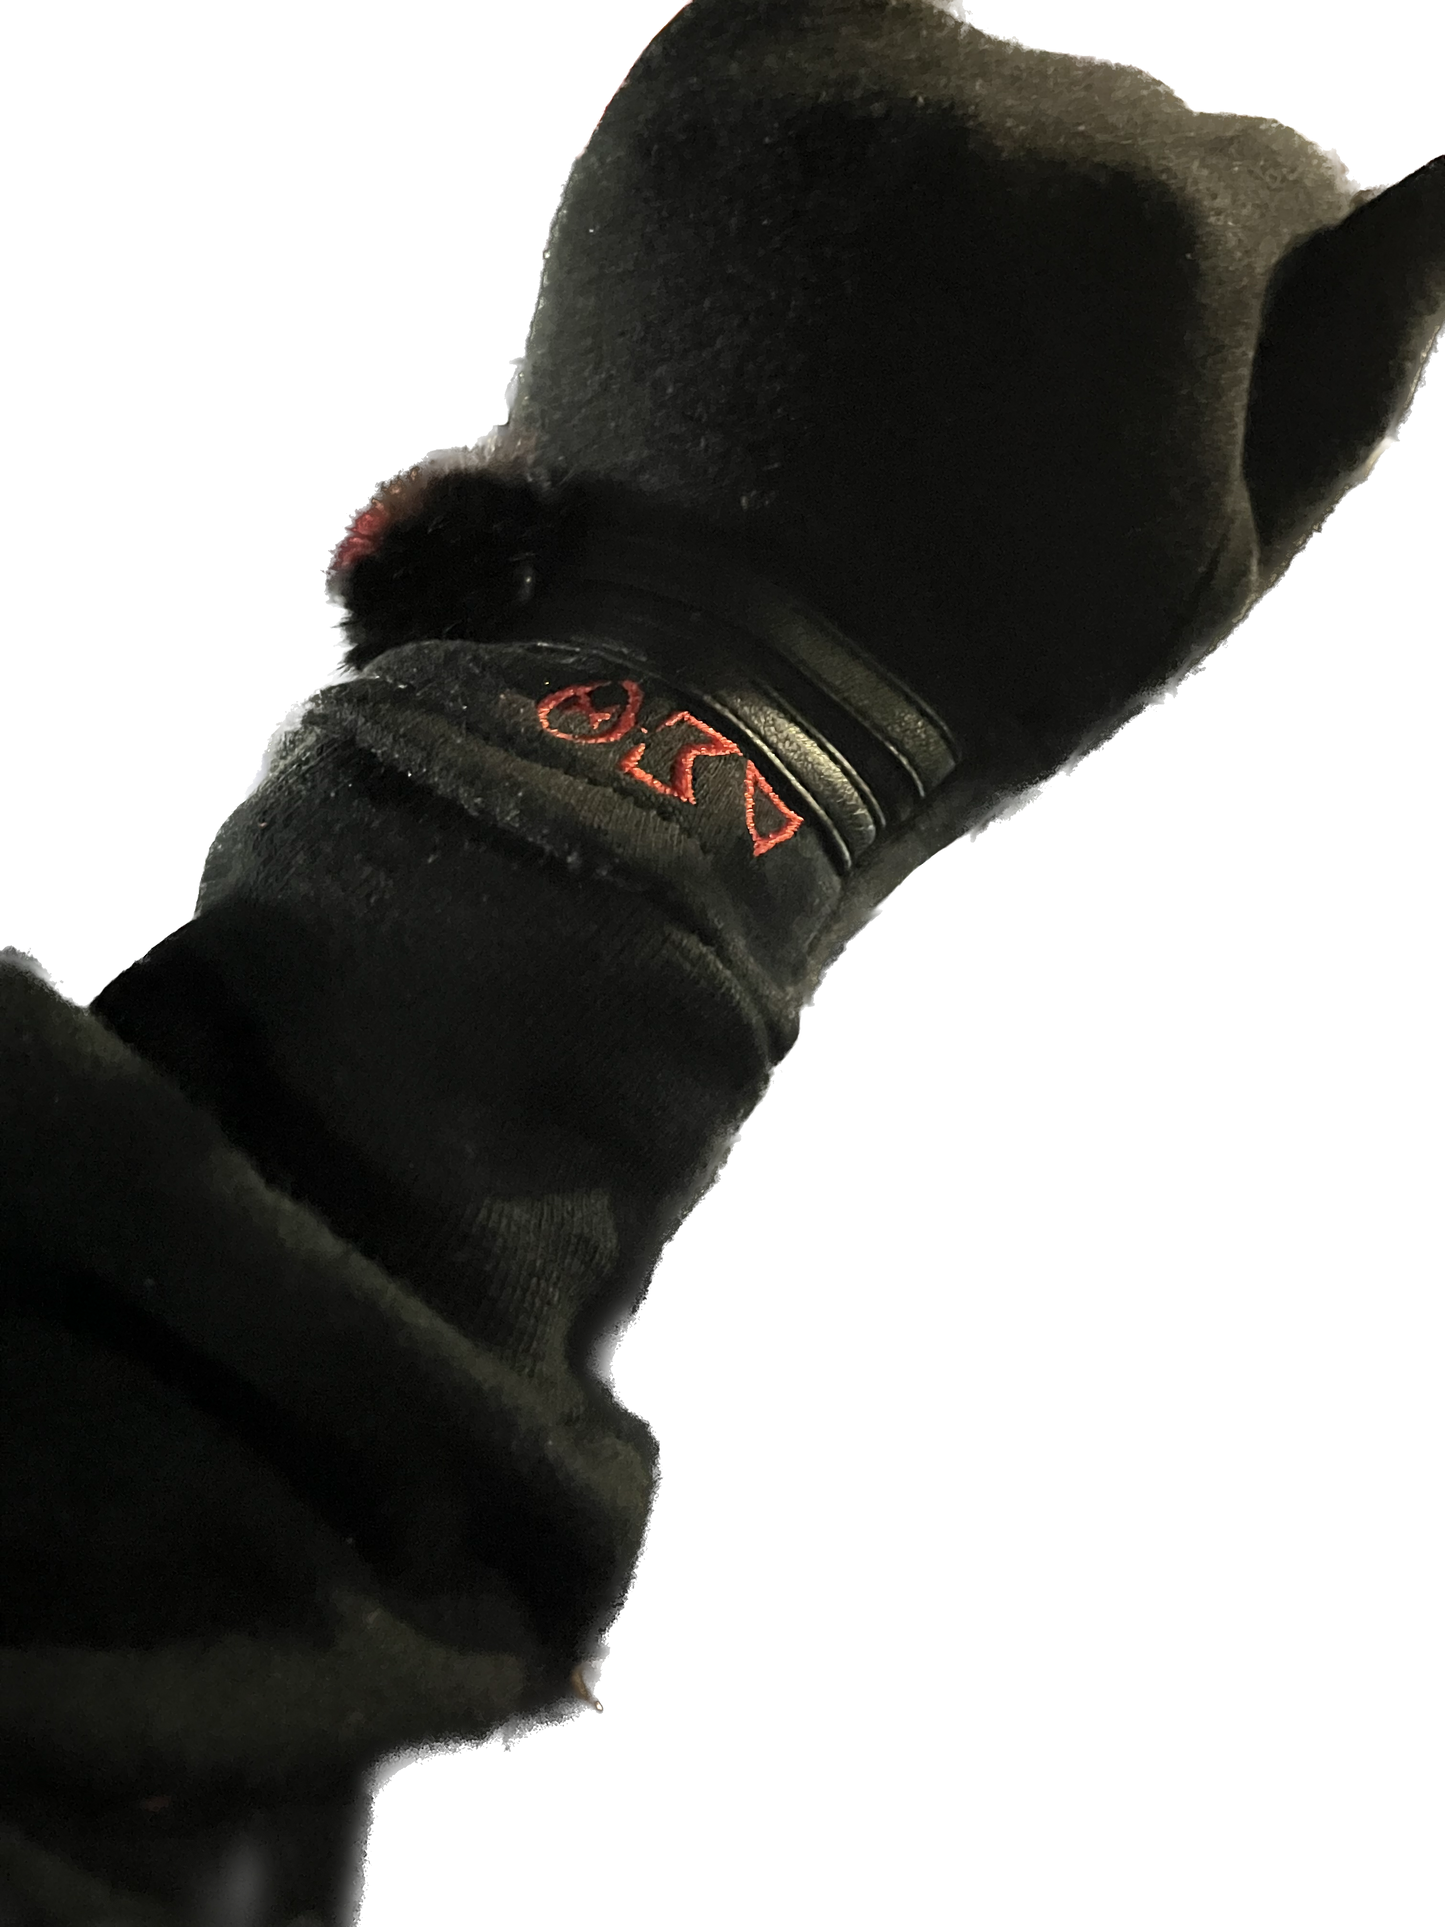 Black Delta Sigma Theta gloves with red embroidered symbols a Black Pompom and two leather strips